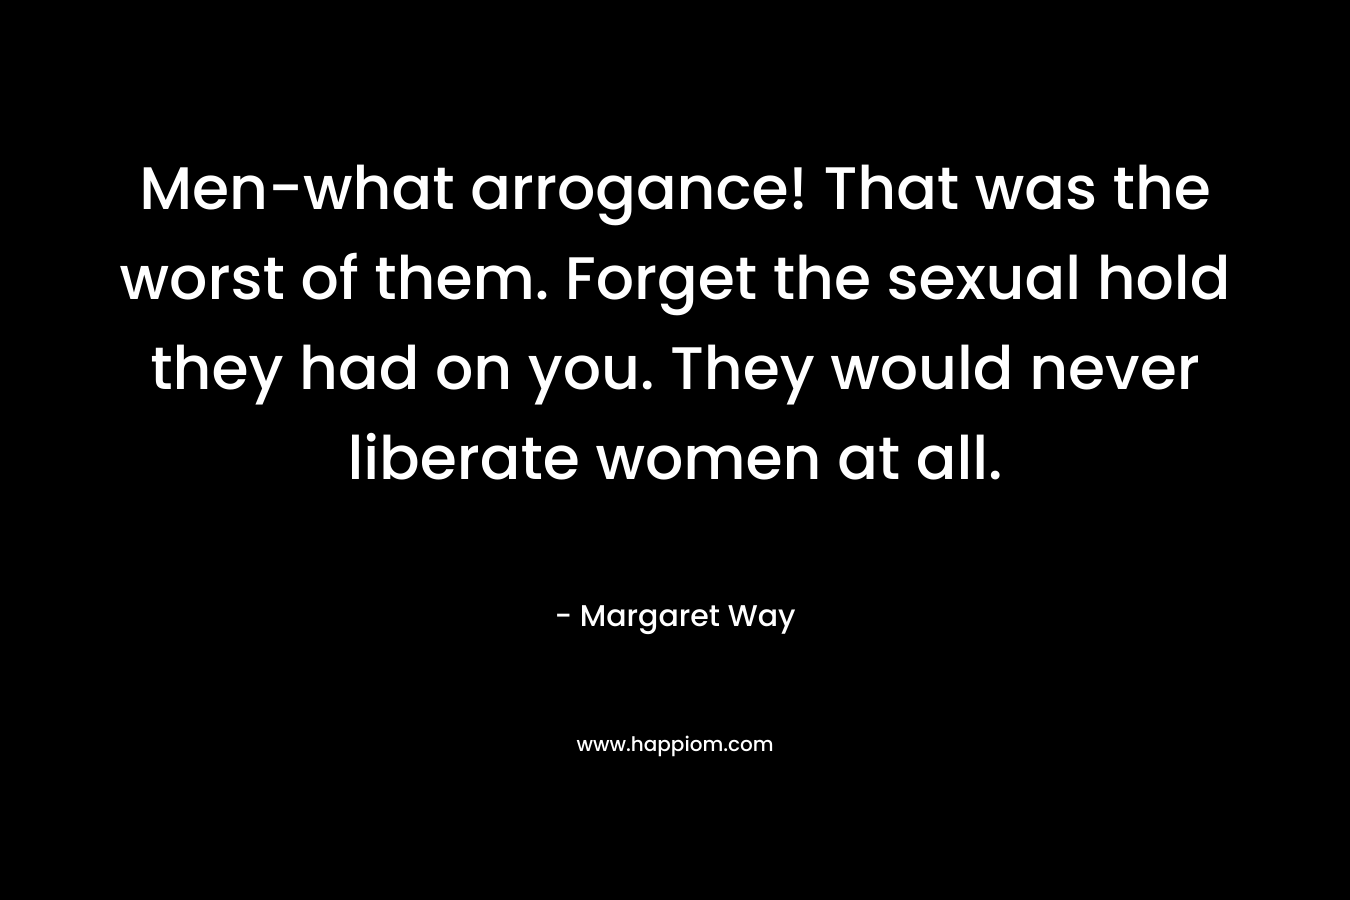 Men-what arrogance! That was the worst of them. Forget the sexual hold they had on you. They would never liberate women at all. – Margaret Way